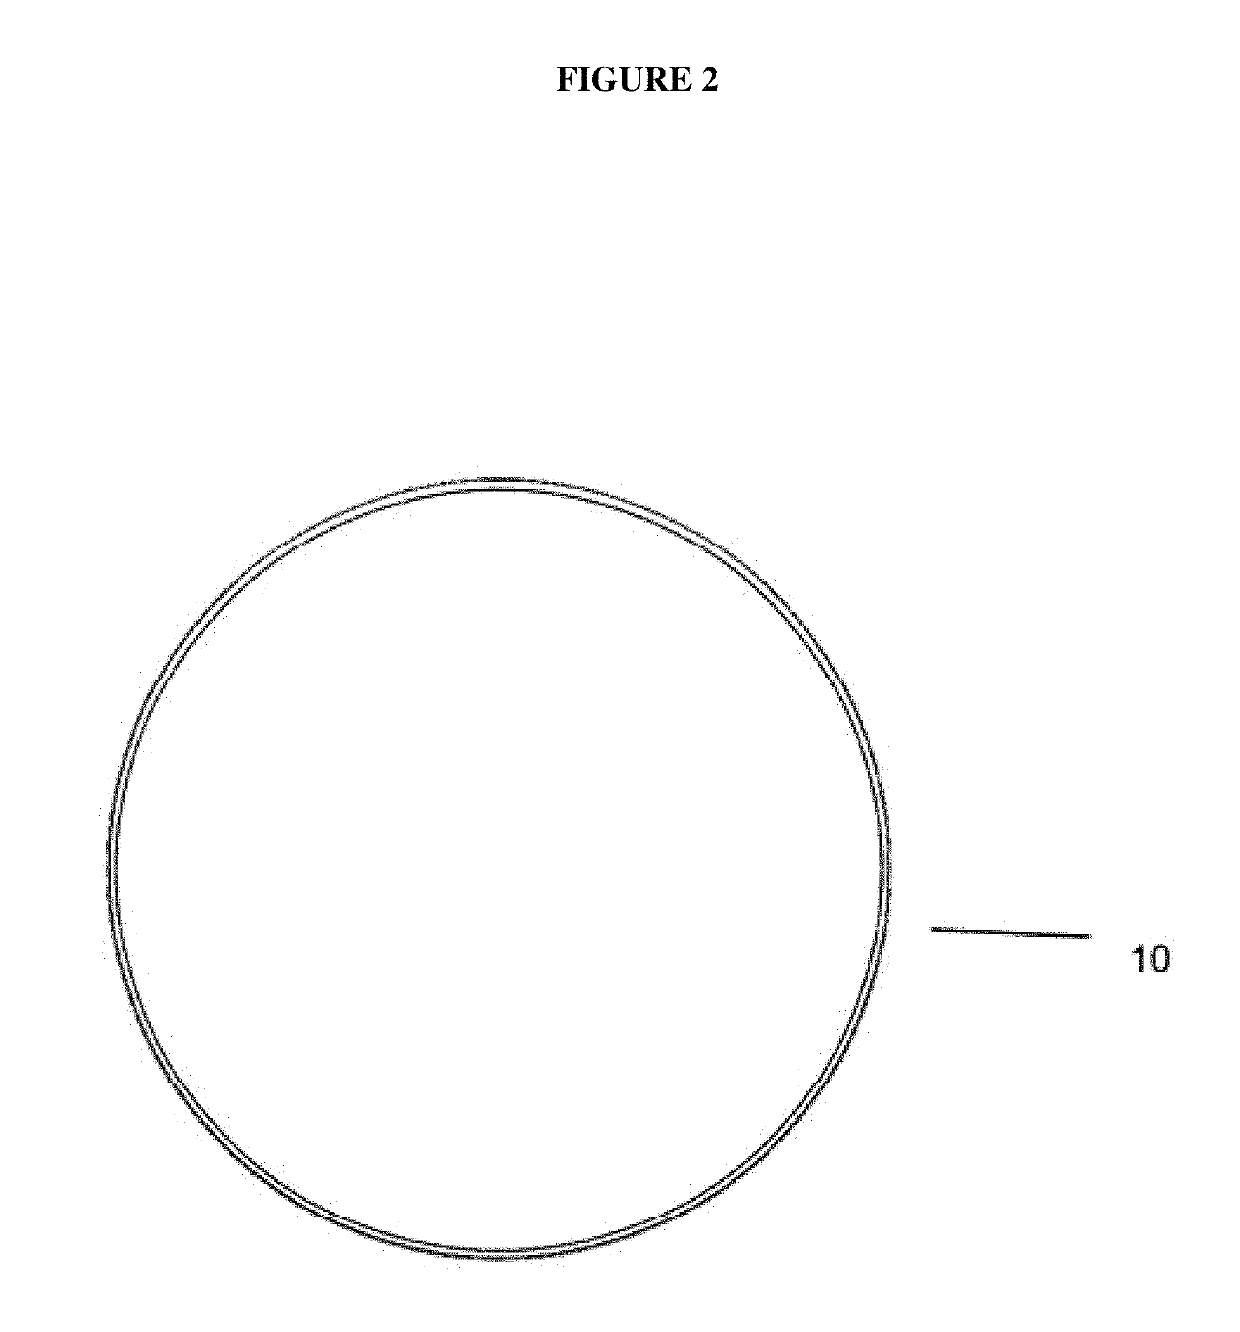 System and method for displaying digital imagery on a digital imagery display locket